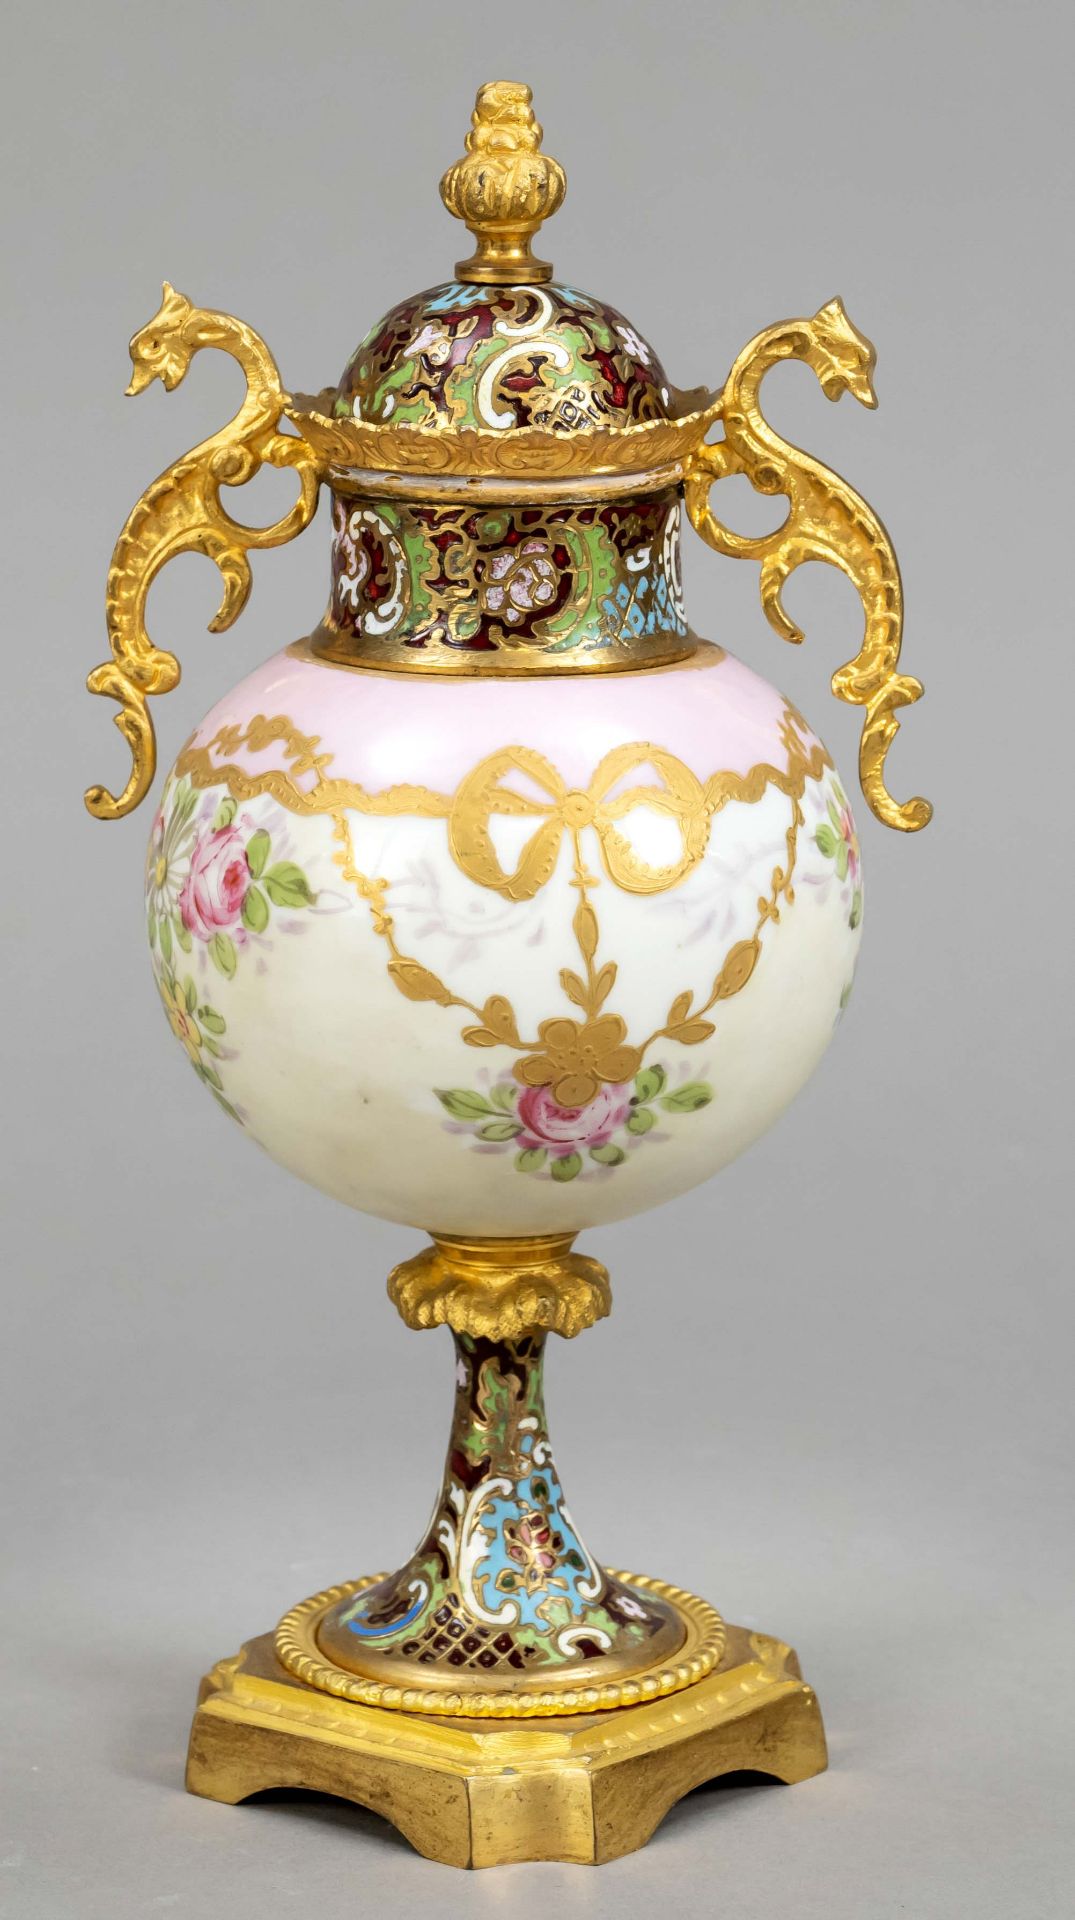 Lidded vase, France, end of 19th century, spherical body with polychrome painting, signed, - Image 2 of 2